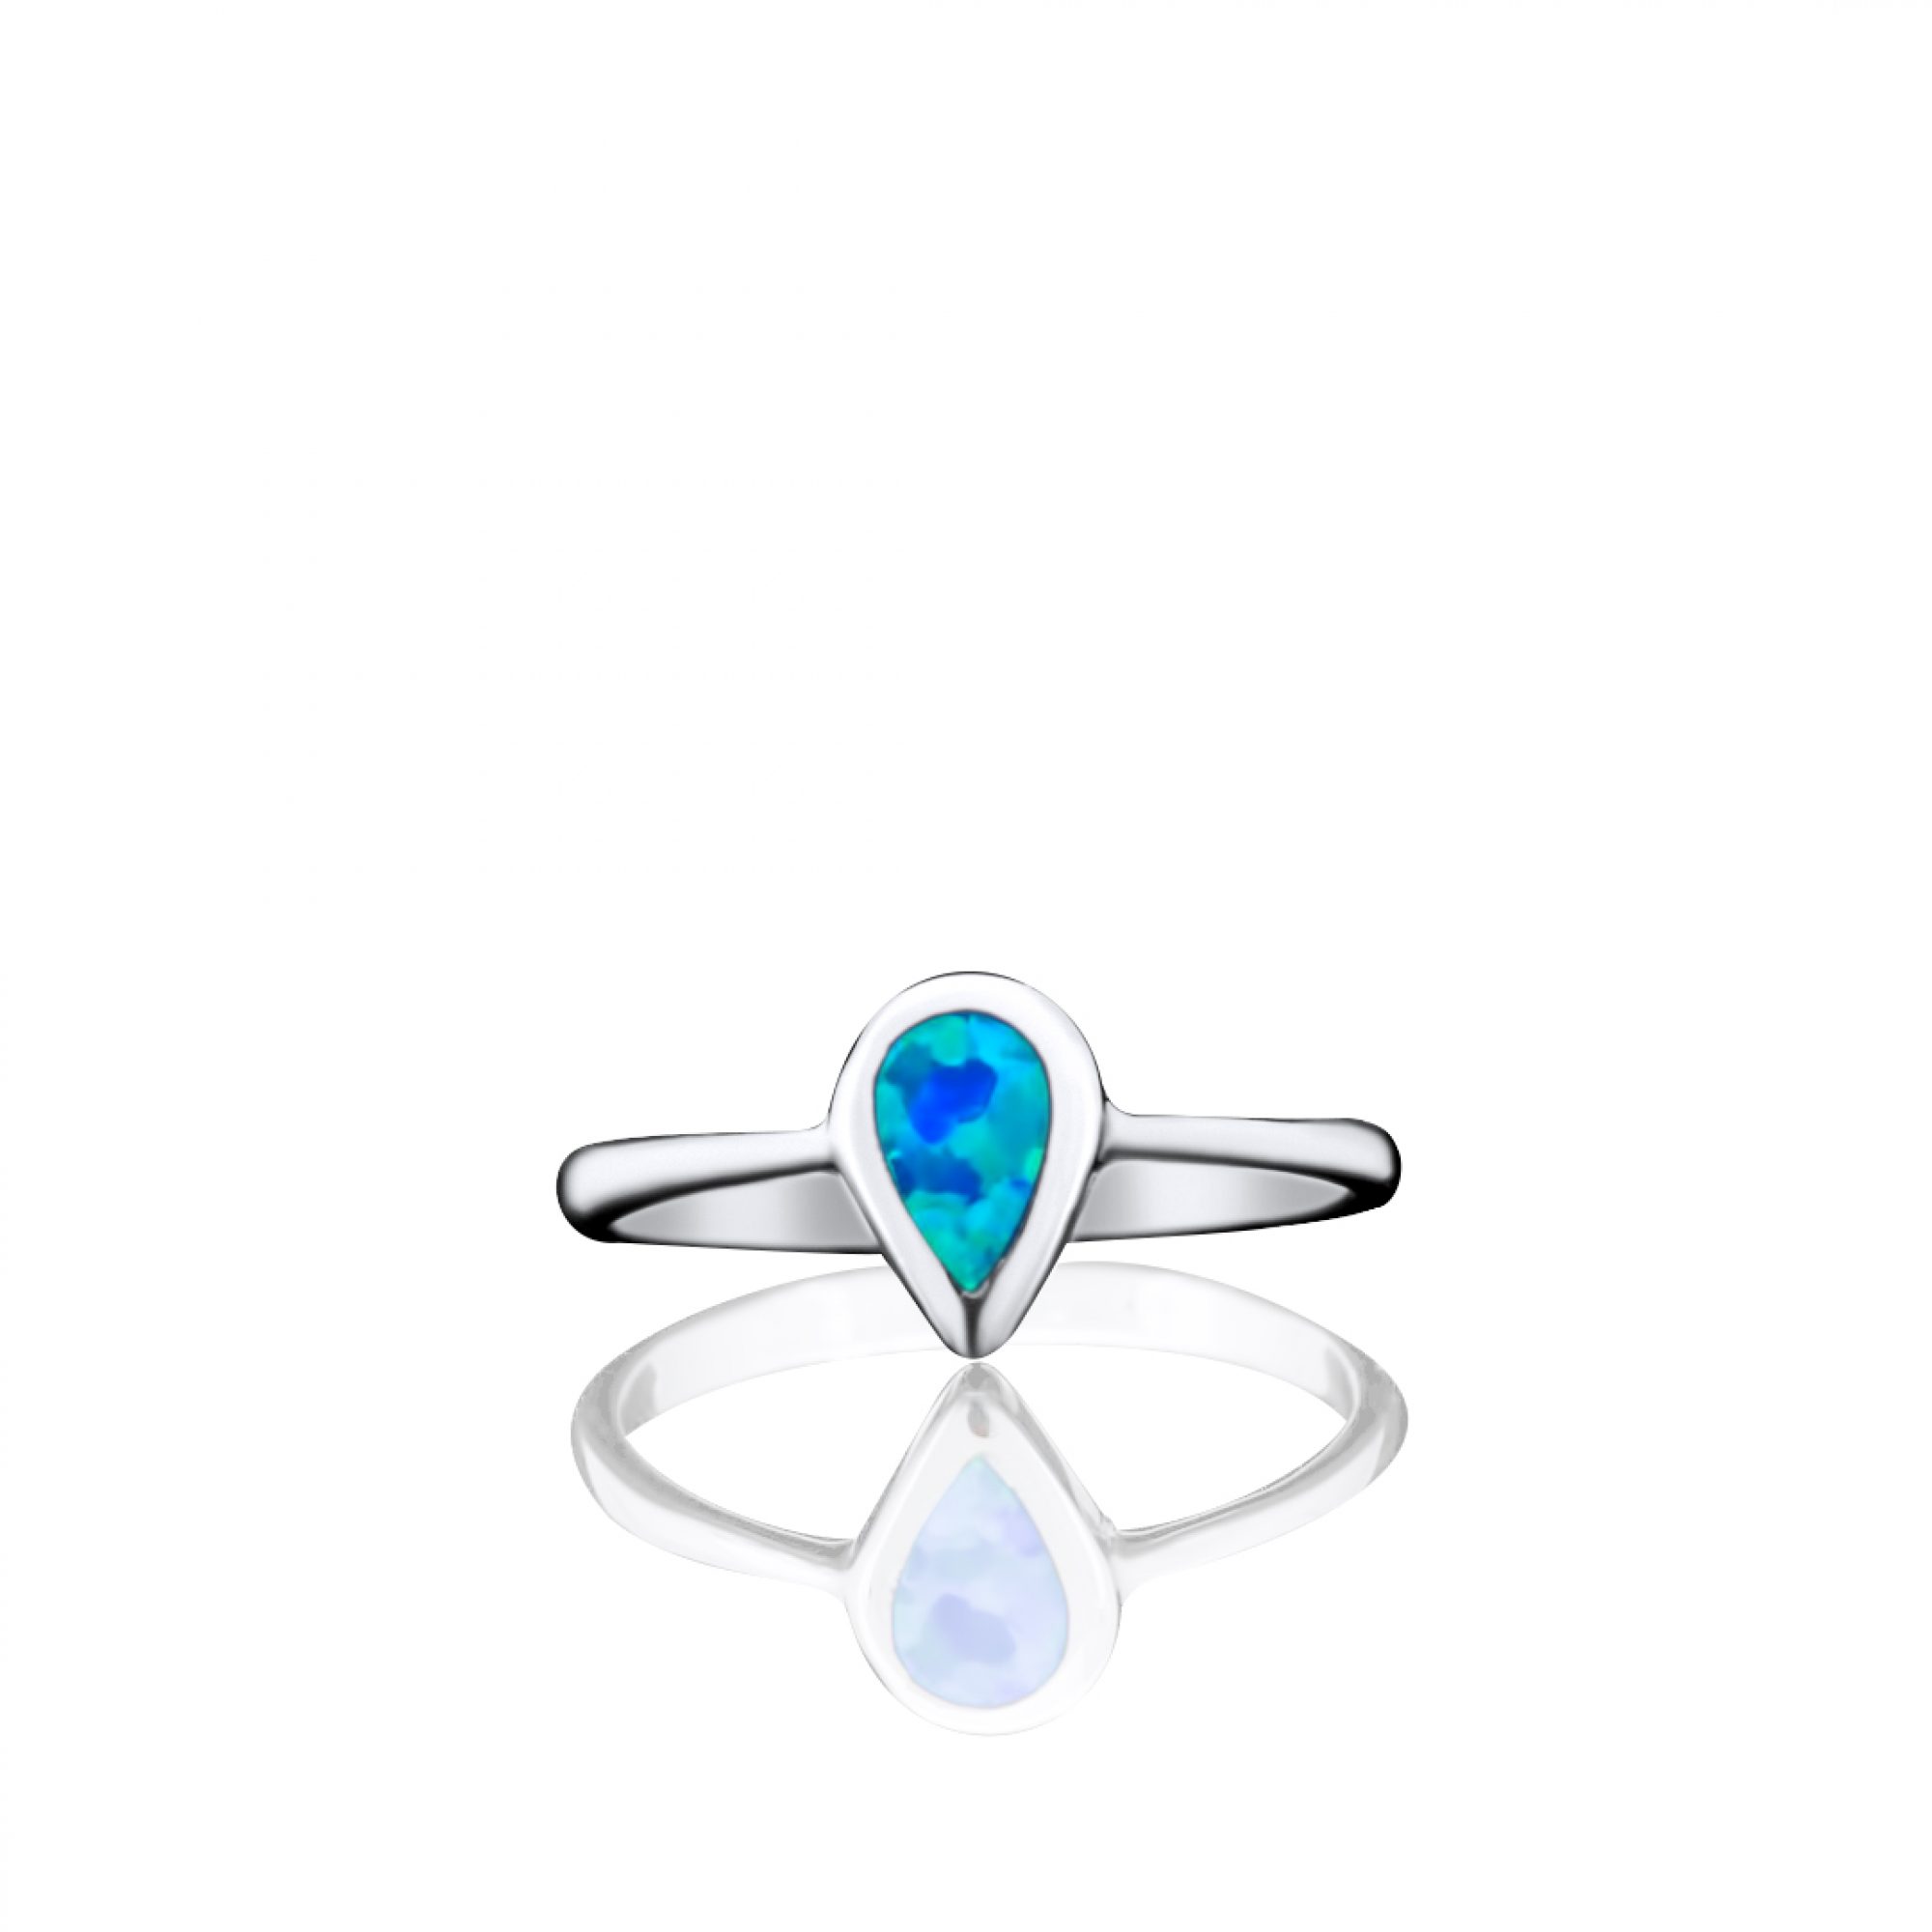 Silver ring with opal stone